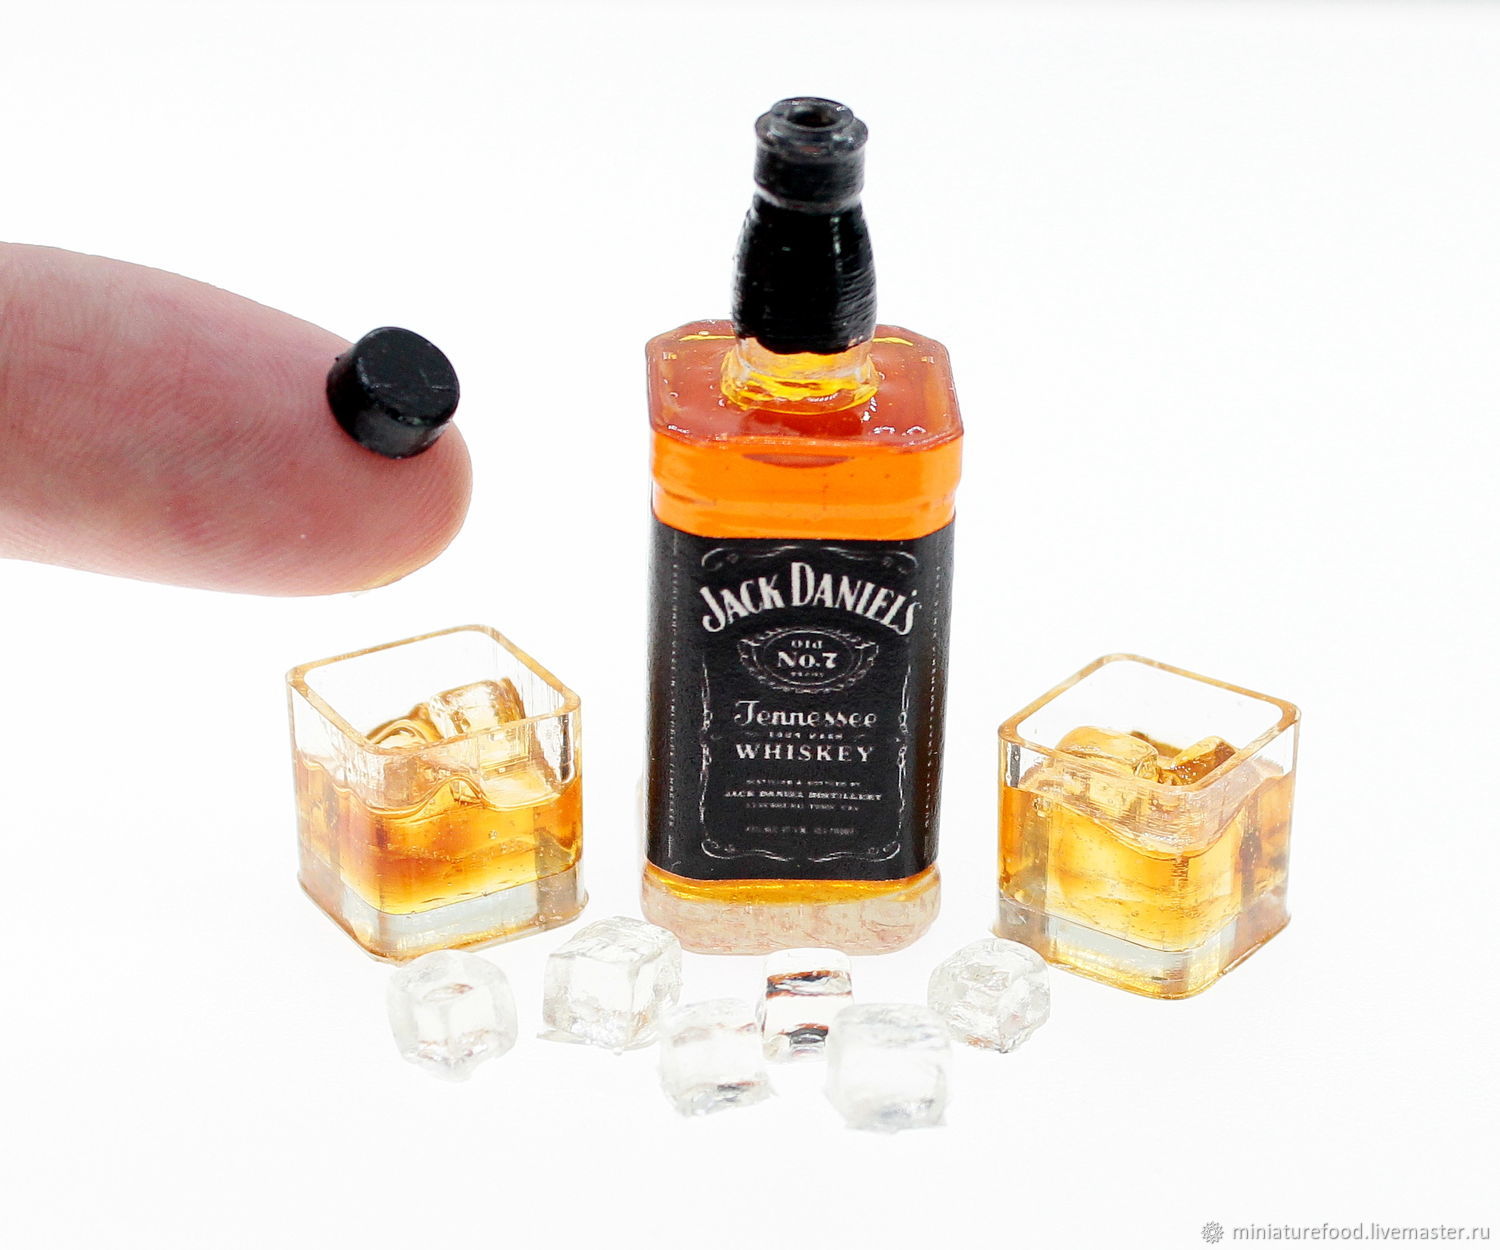 1/6 Scale JACK DANIELS WHISKEY BOTTLE for 9"'-12" ACTION FIGURES  WITH FREE GIFT 